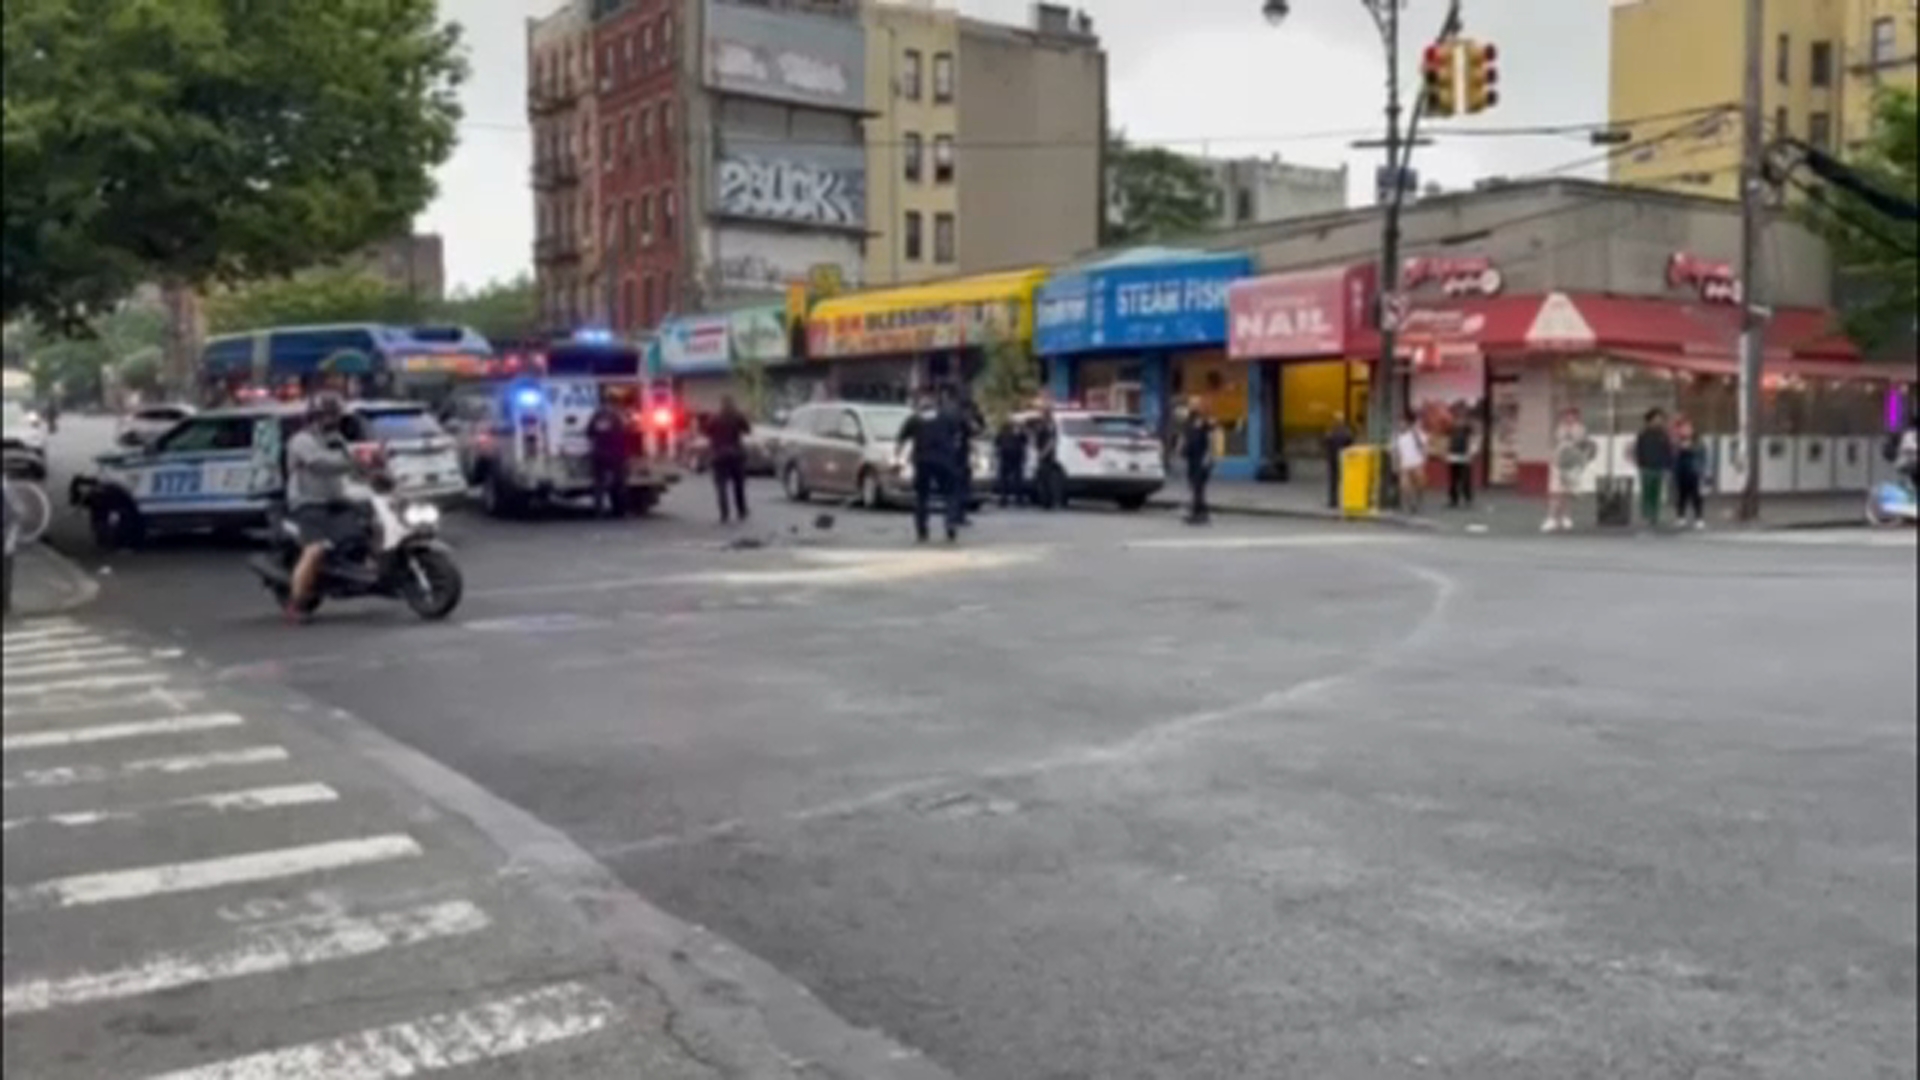 2 NYPD officers hurt after their vehicle crashes into another car in the Bronx